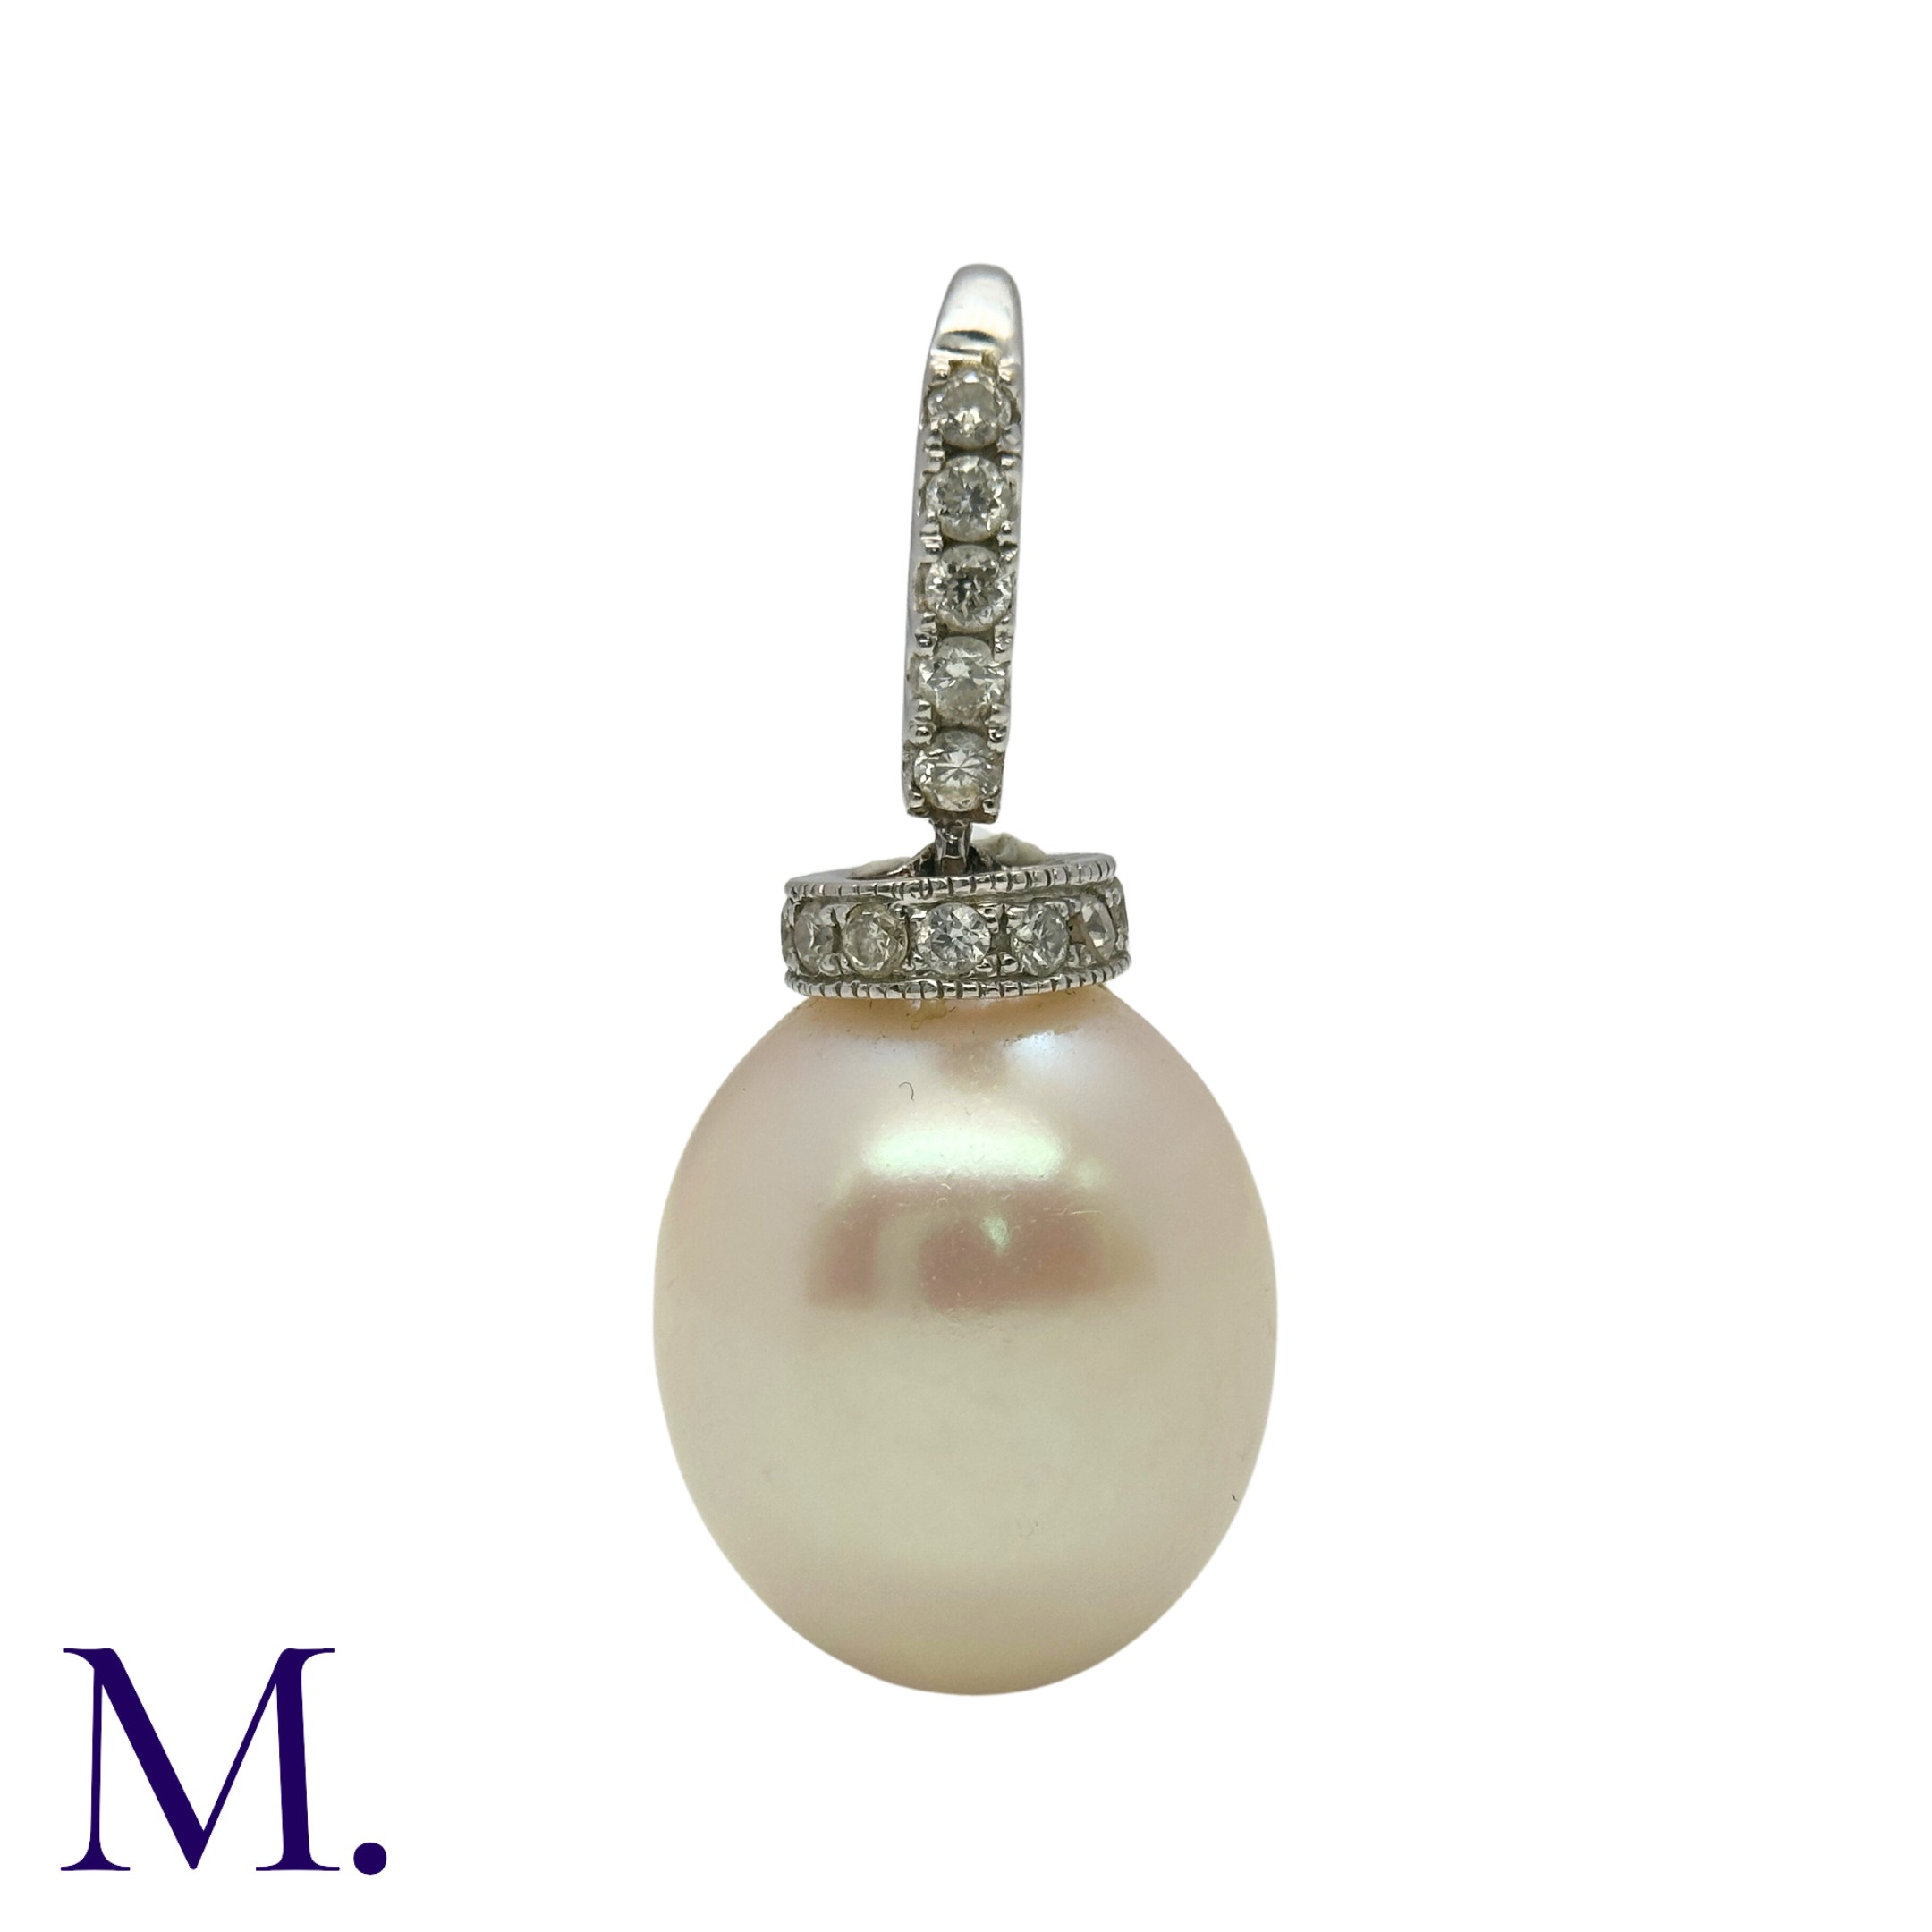 A Diamond and Pearl Drop Pendant in 18K white gold, set with an oval cream pearl with pink